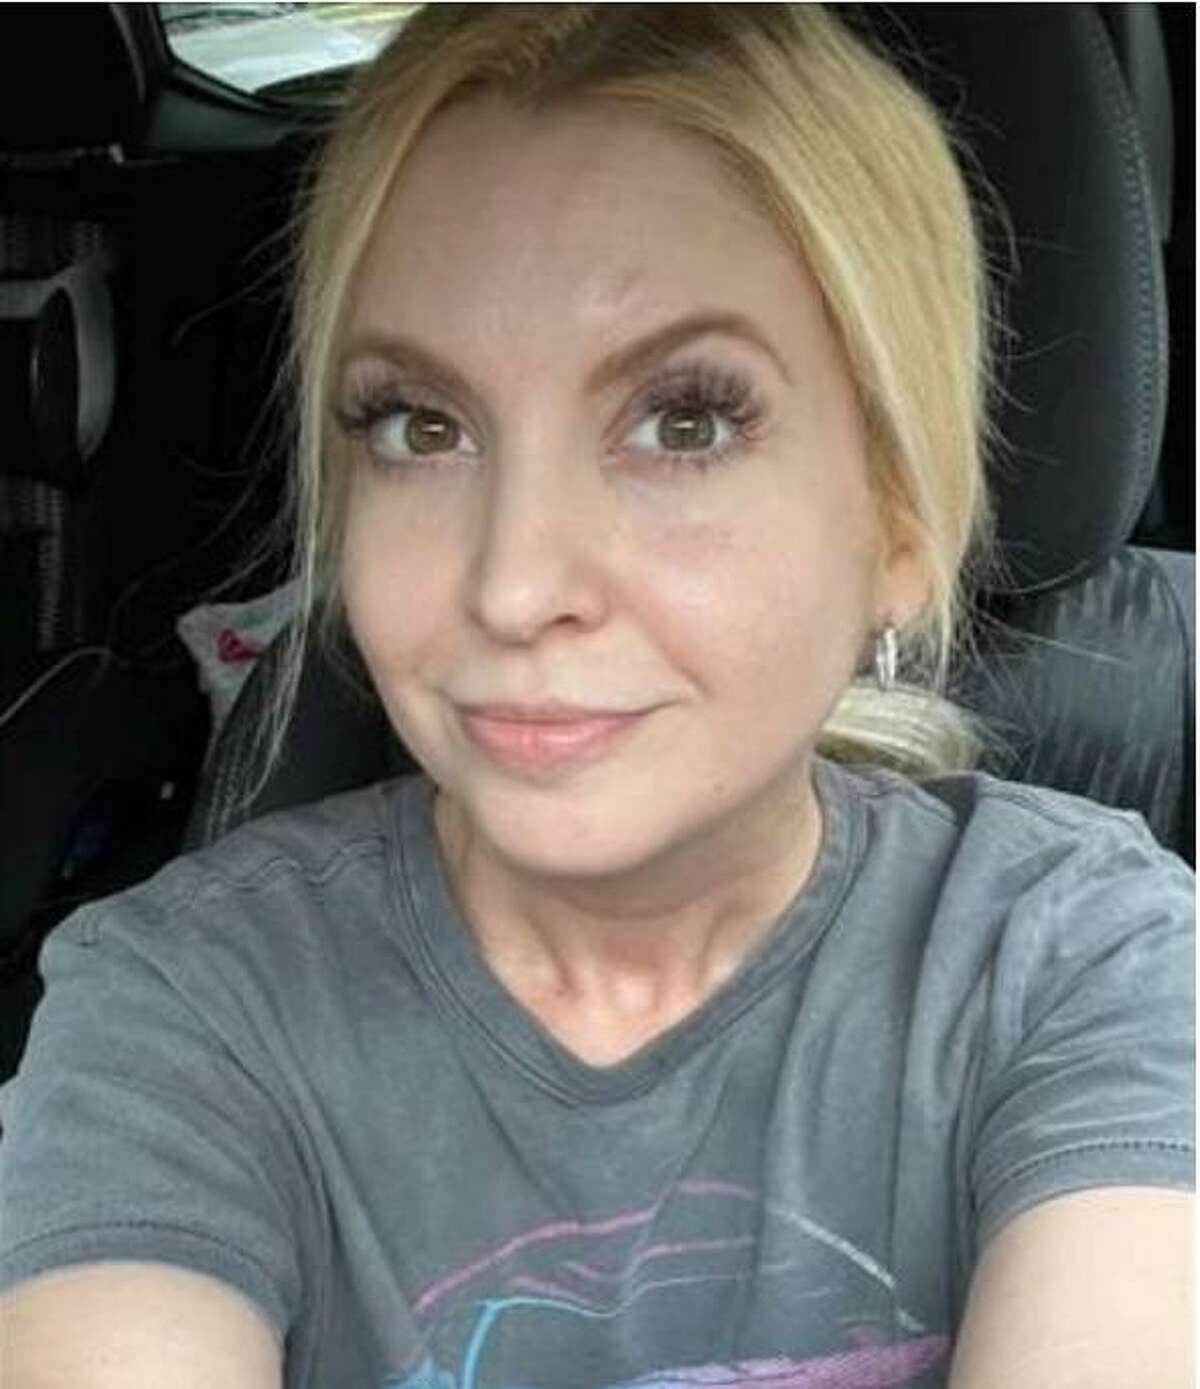 The cause of death for Christina “Chrissy” Powell was determined to be hypothermia complicated by alcohol intoxication, the Bexar County Medical Examiner has determined. Powell had been missing since July 5 when she was found dead in her SUV in a shopping center on the Northwest Side on July 23.